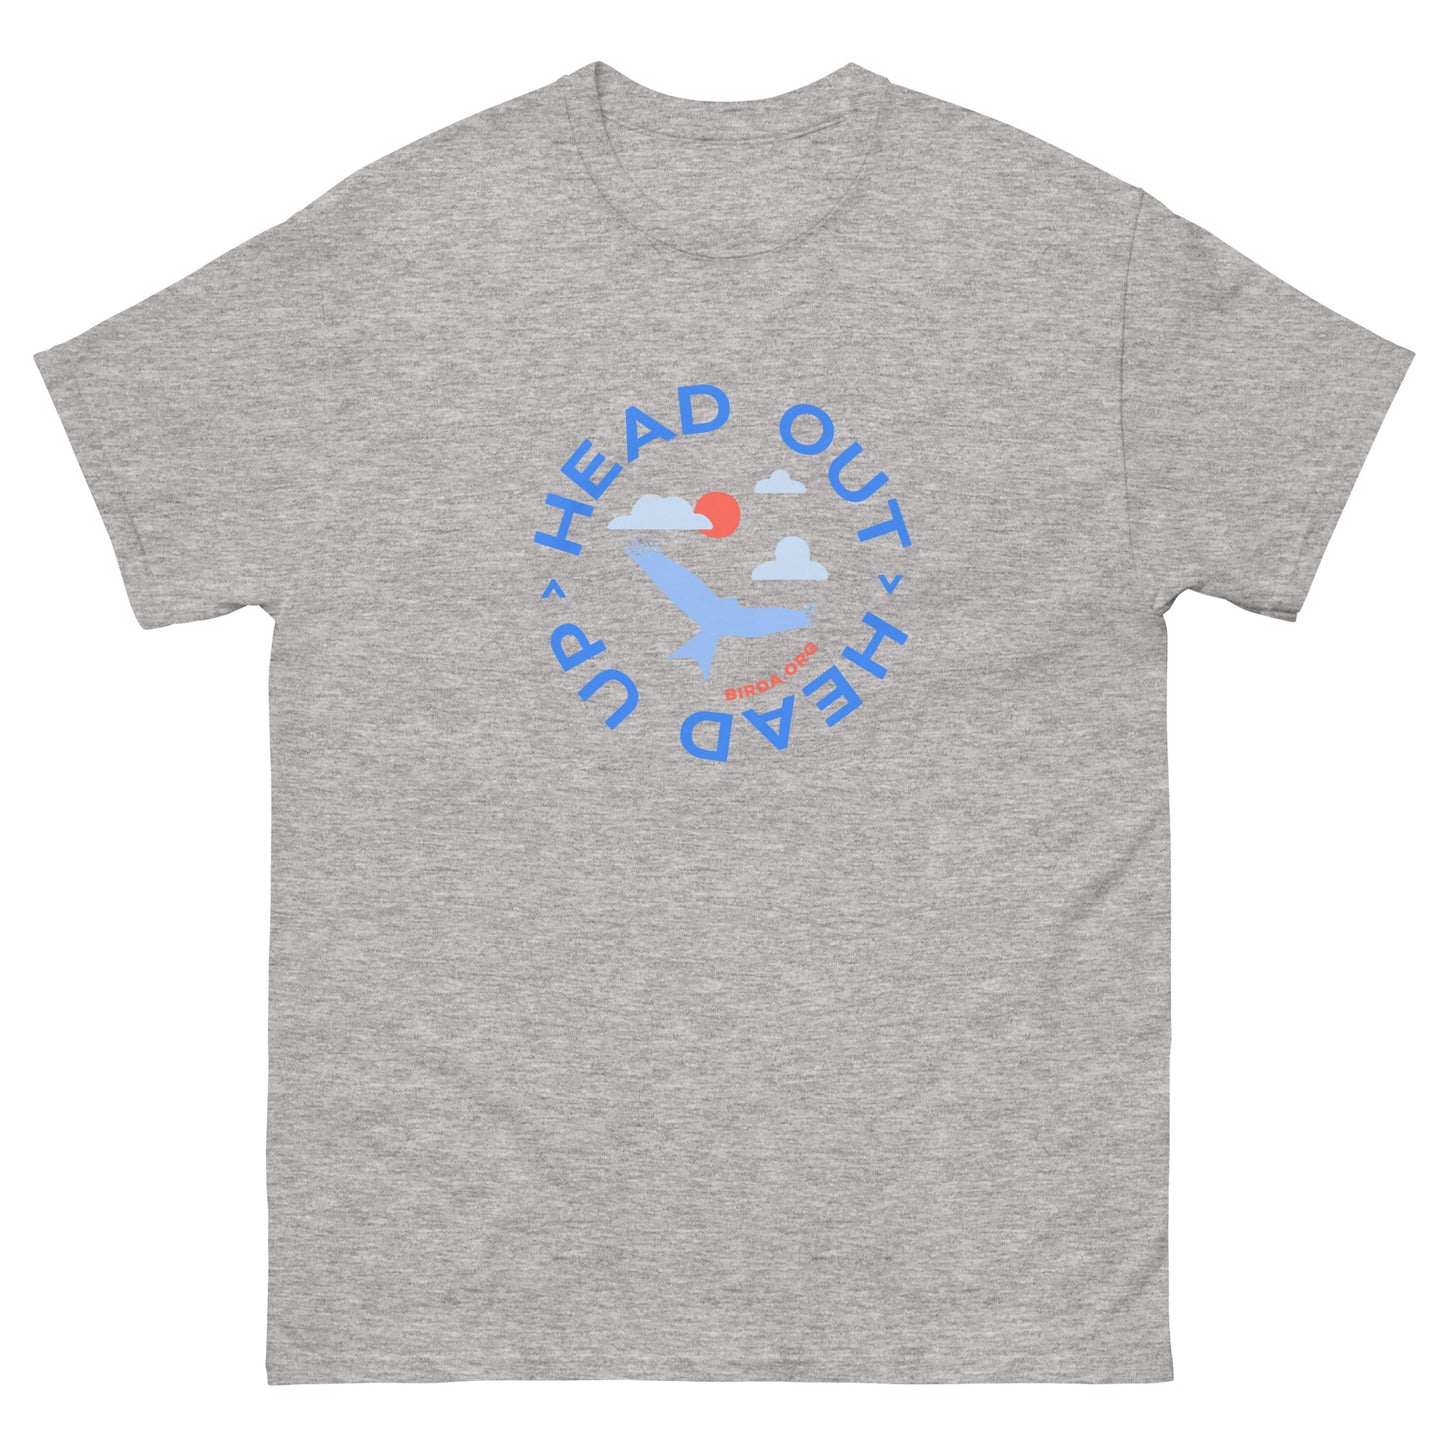 Head Out T-Shirt